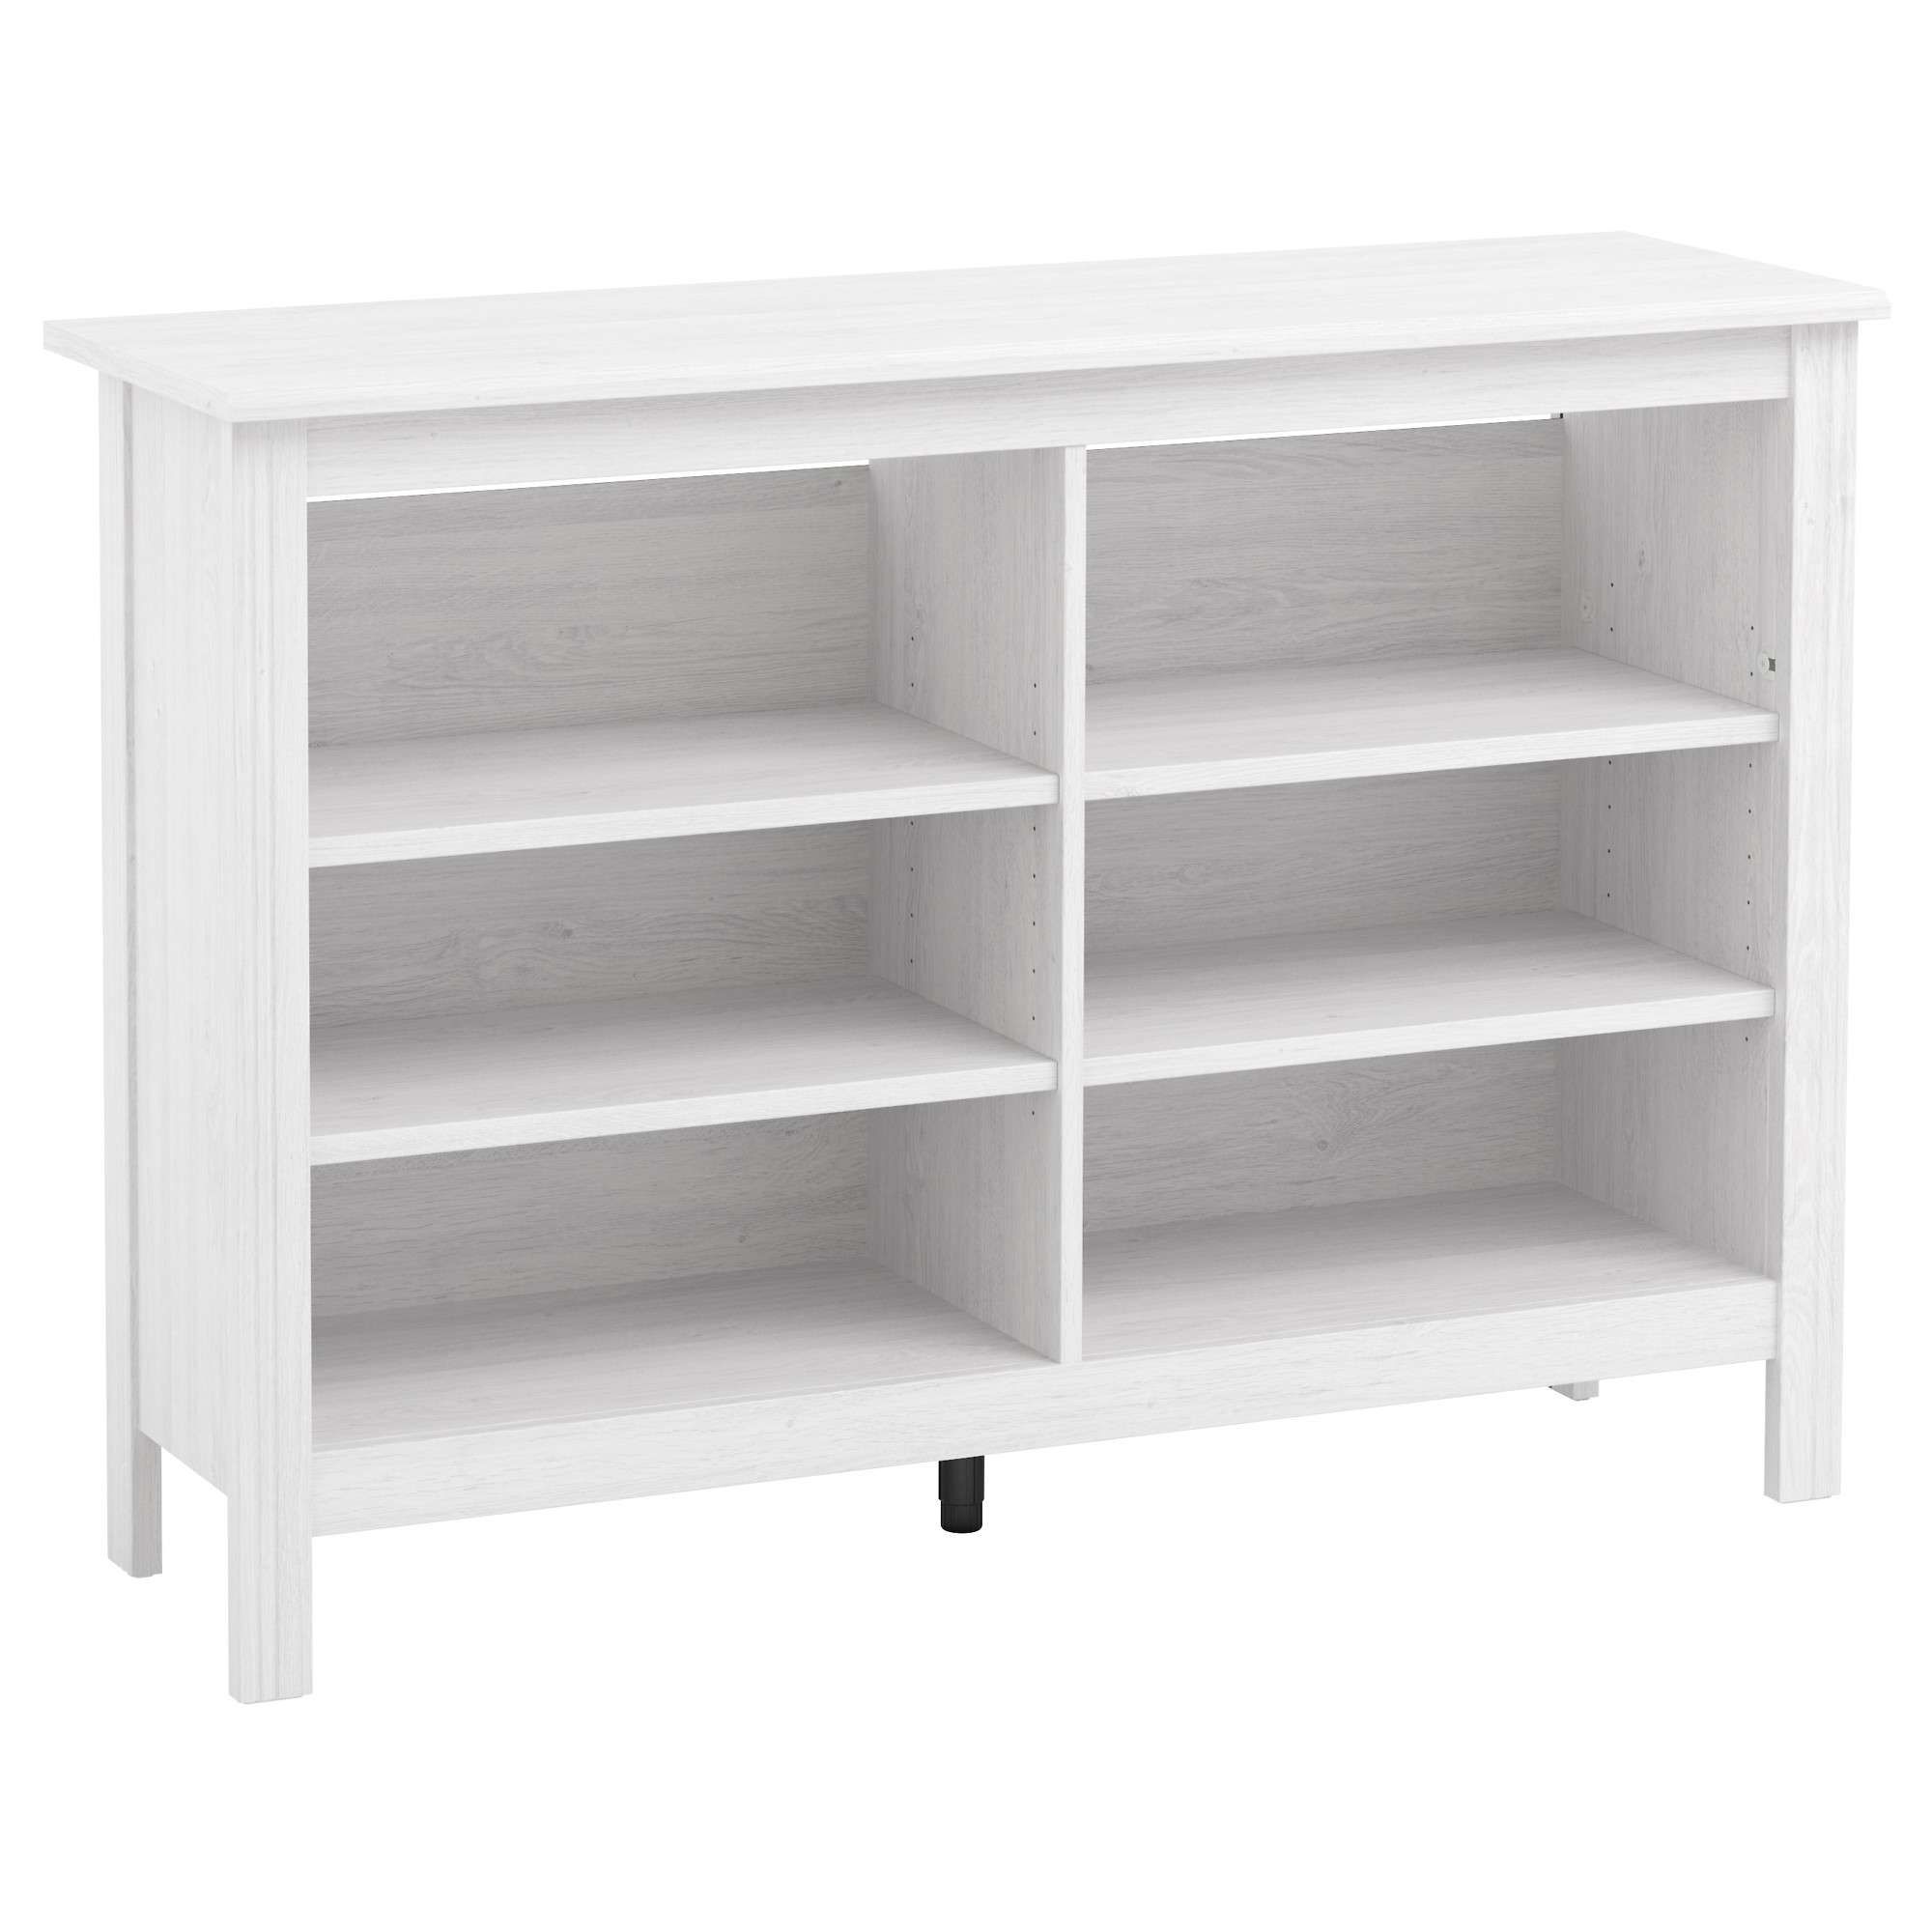 Tv Stands & Tv Units | Ikea In Small White Tv Cabinets (View 7 of 20)